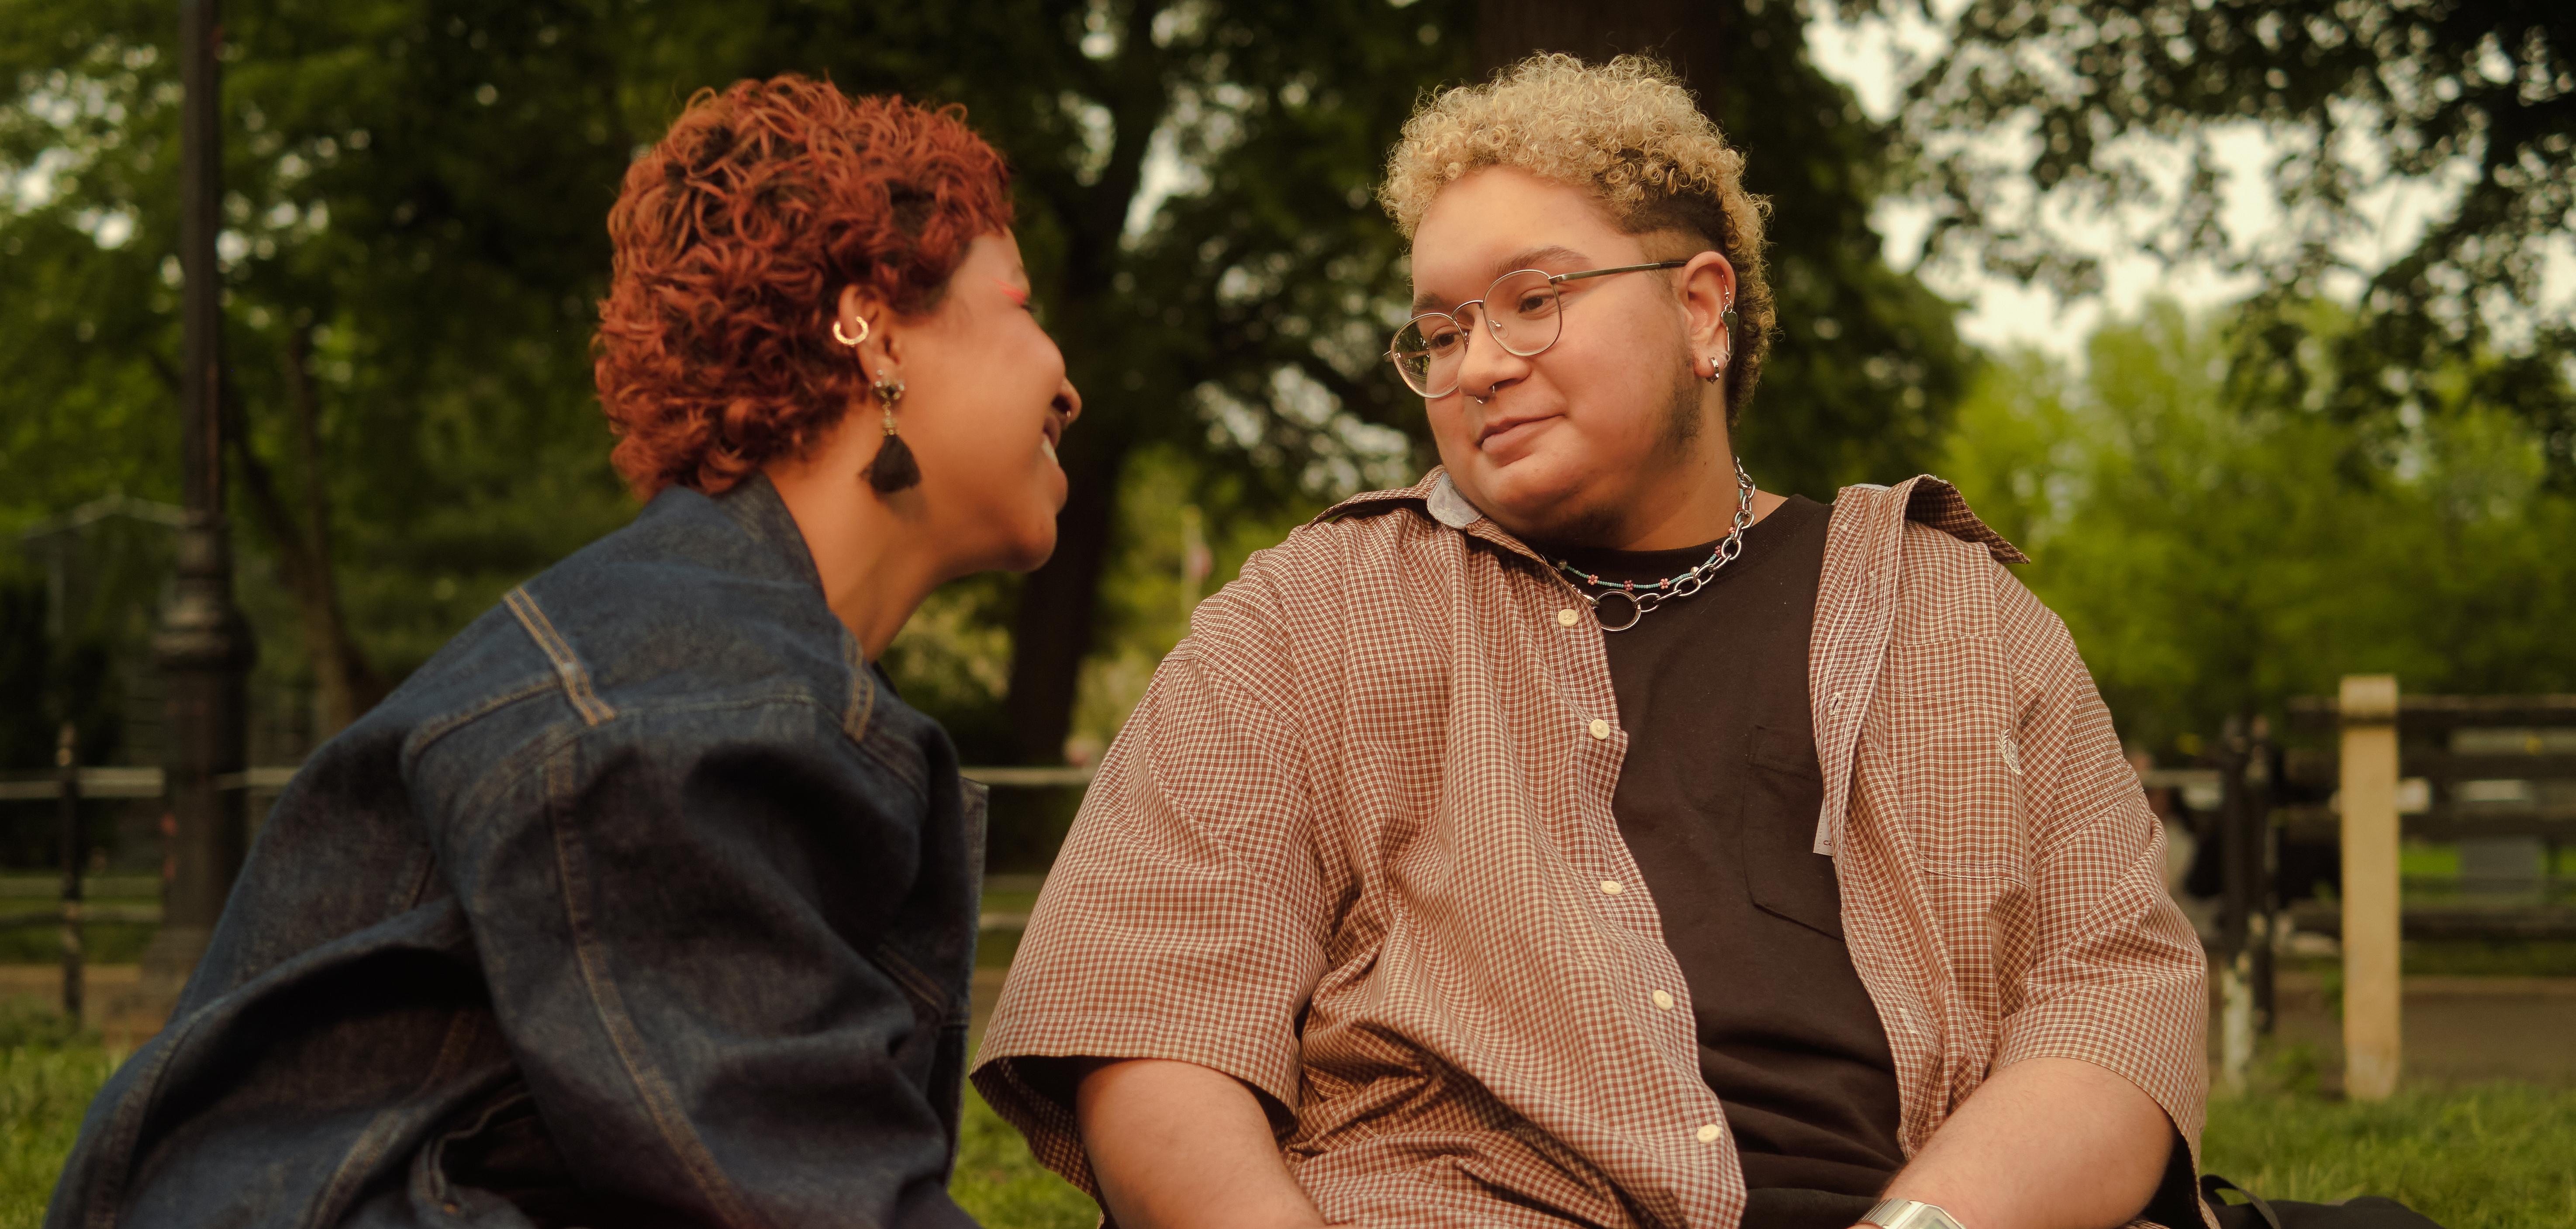 Two trans people in a park, looking at each other, laughing.